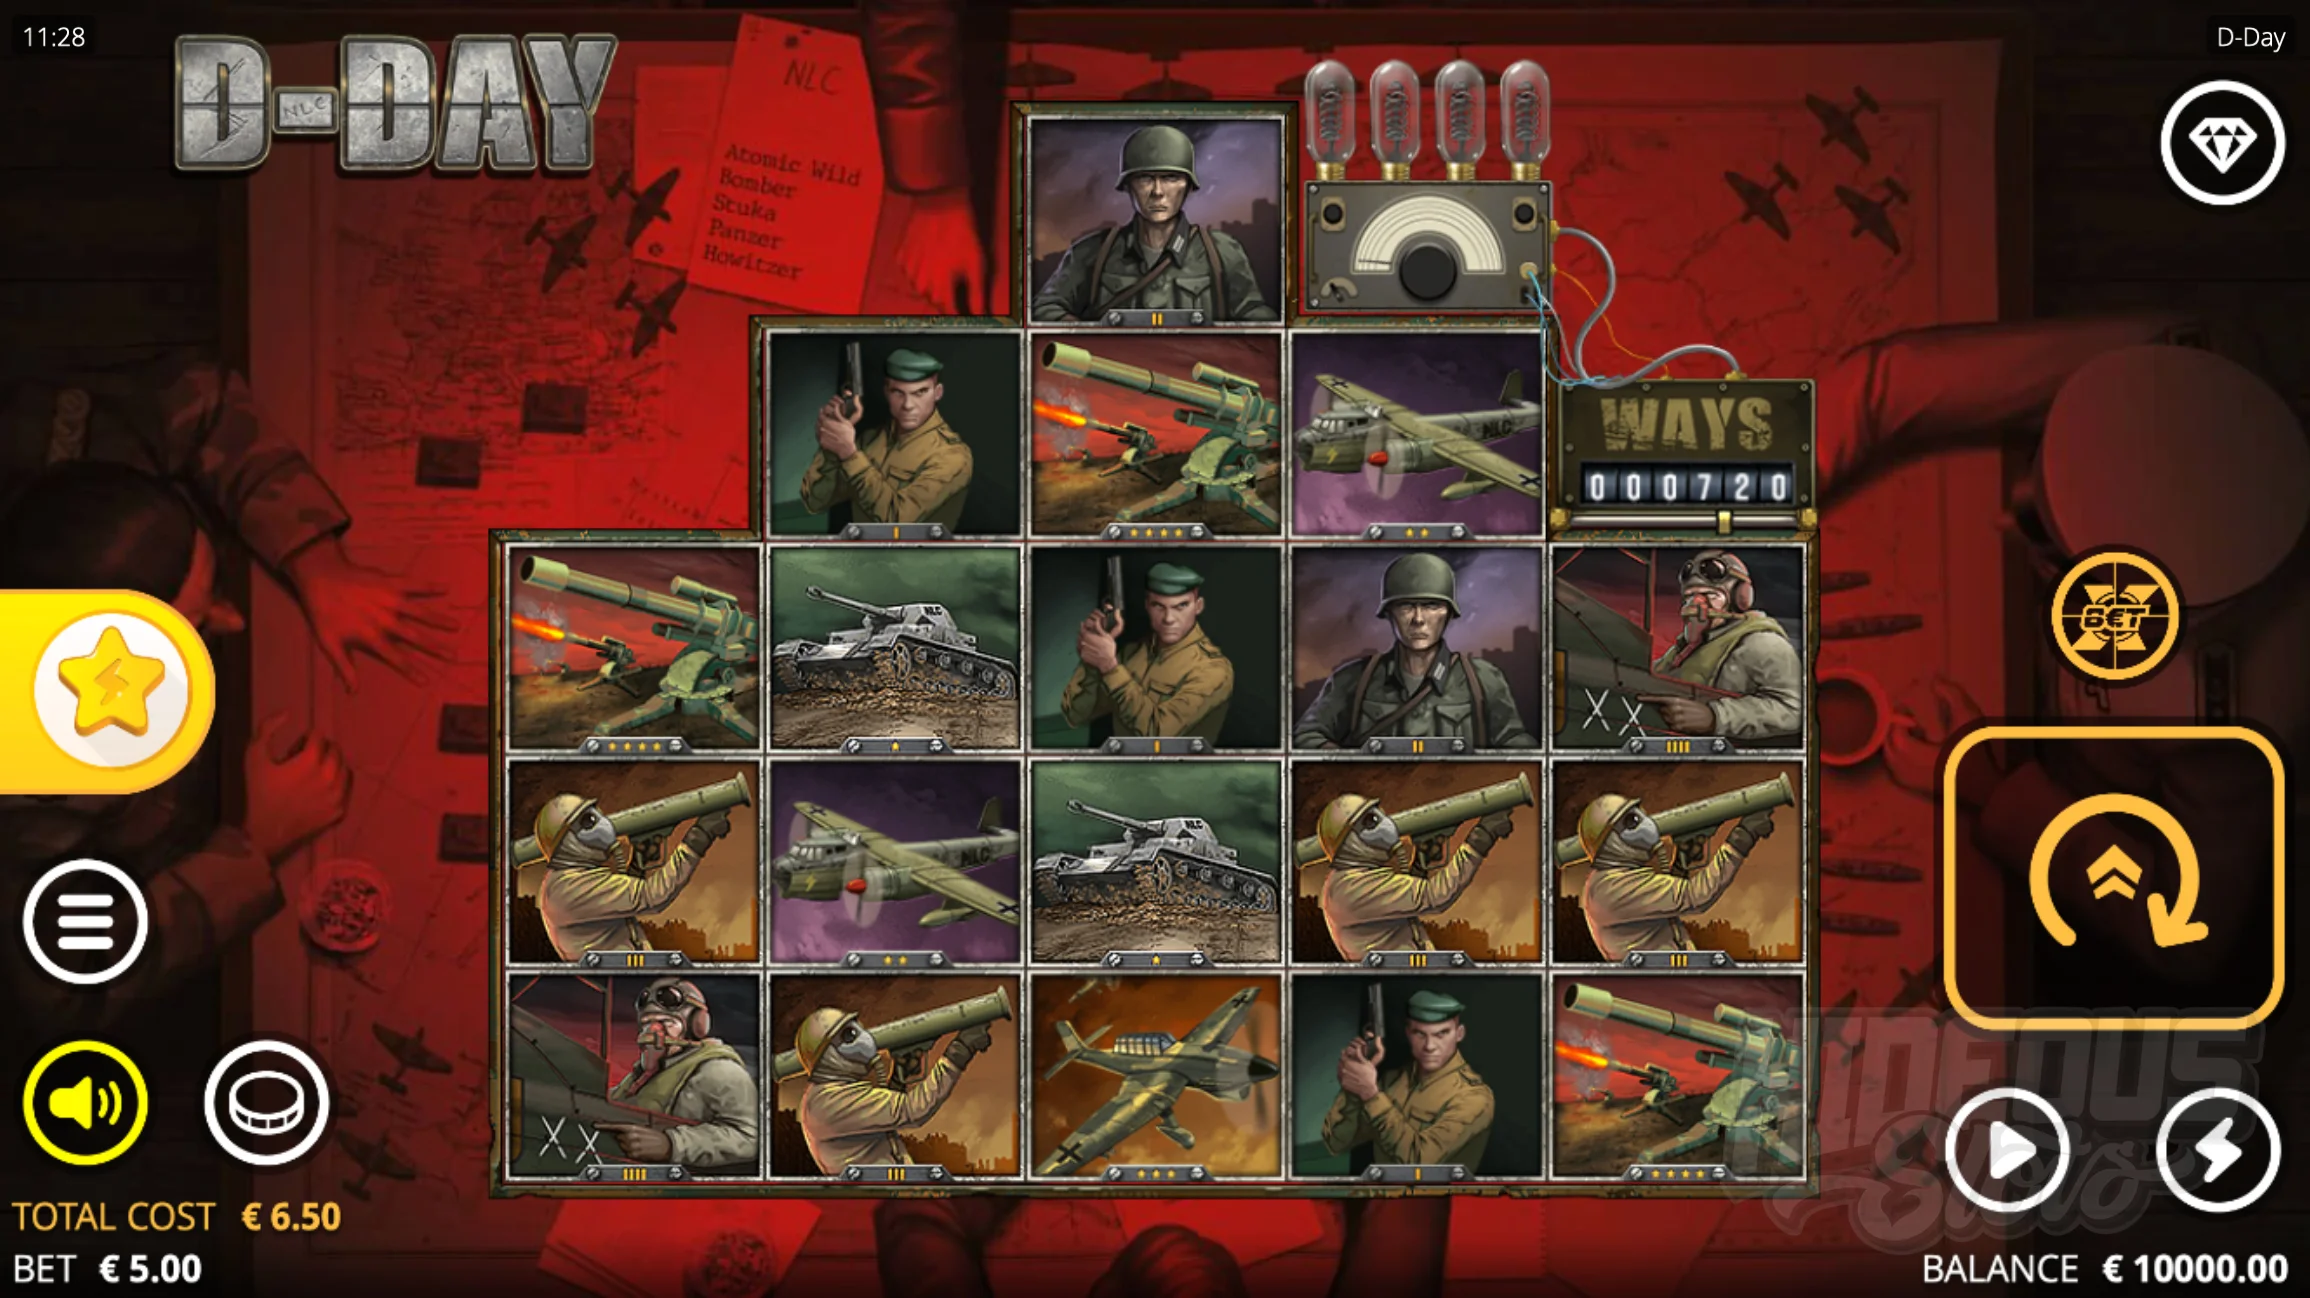 D-Day Base Game